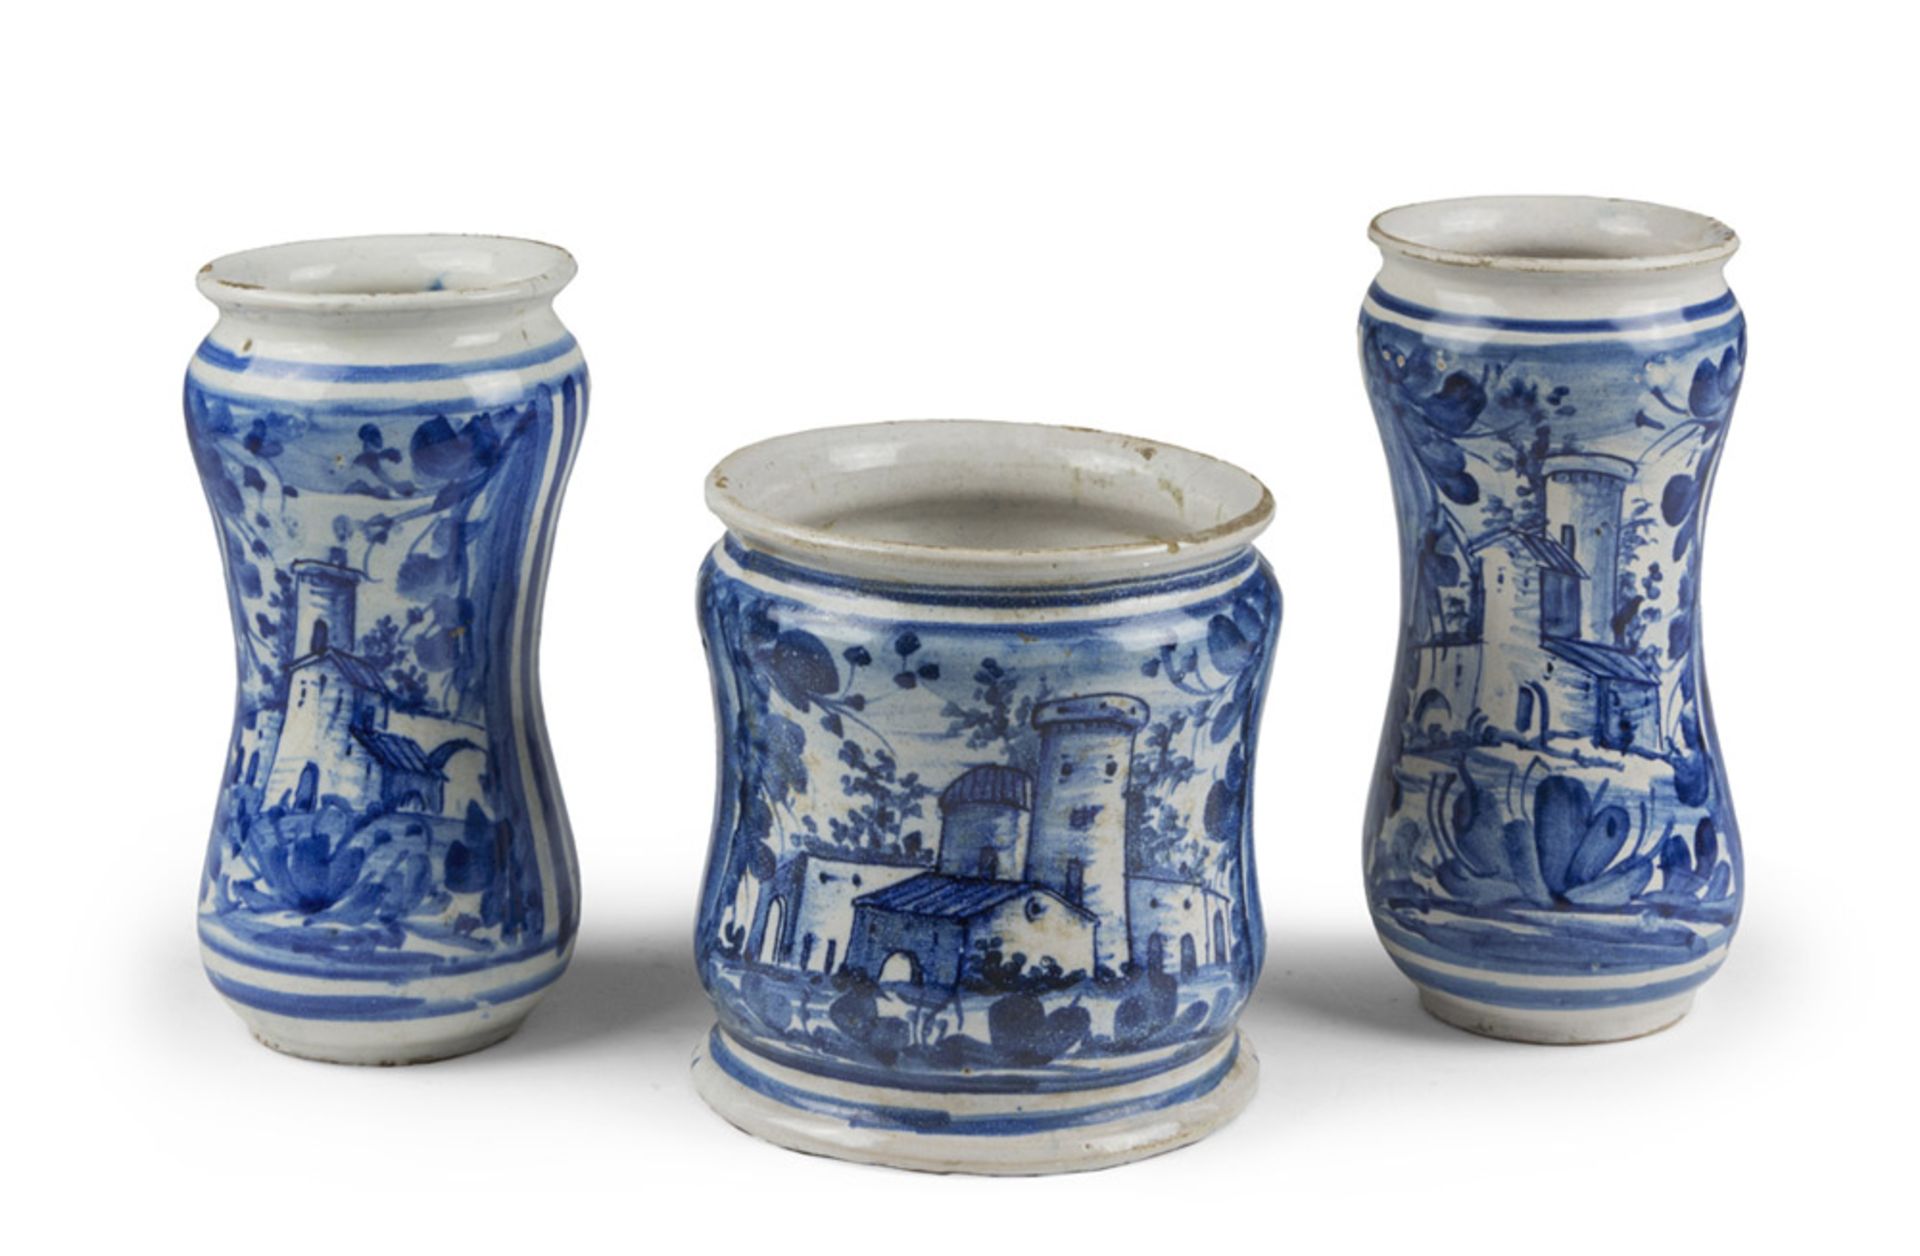 TWO ALBARELLOS AND A PHARMACY VASE IN MAIOLICA, NAPLES FINE 18TH CENTURY